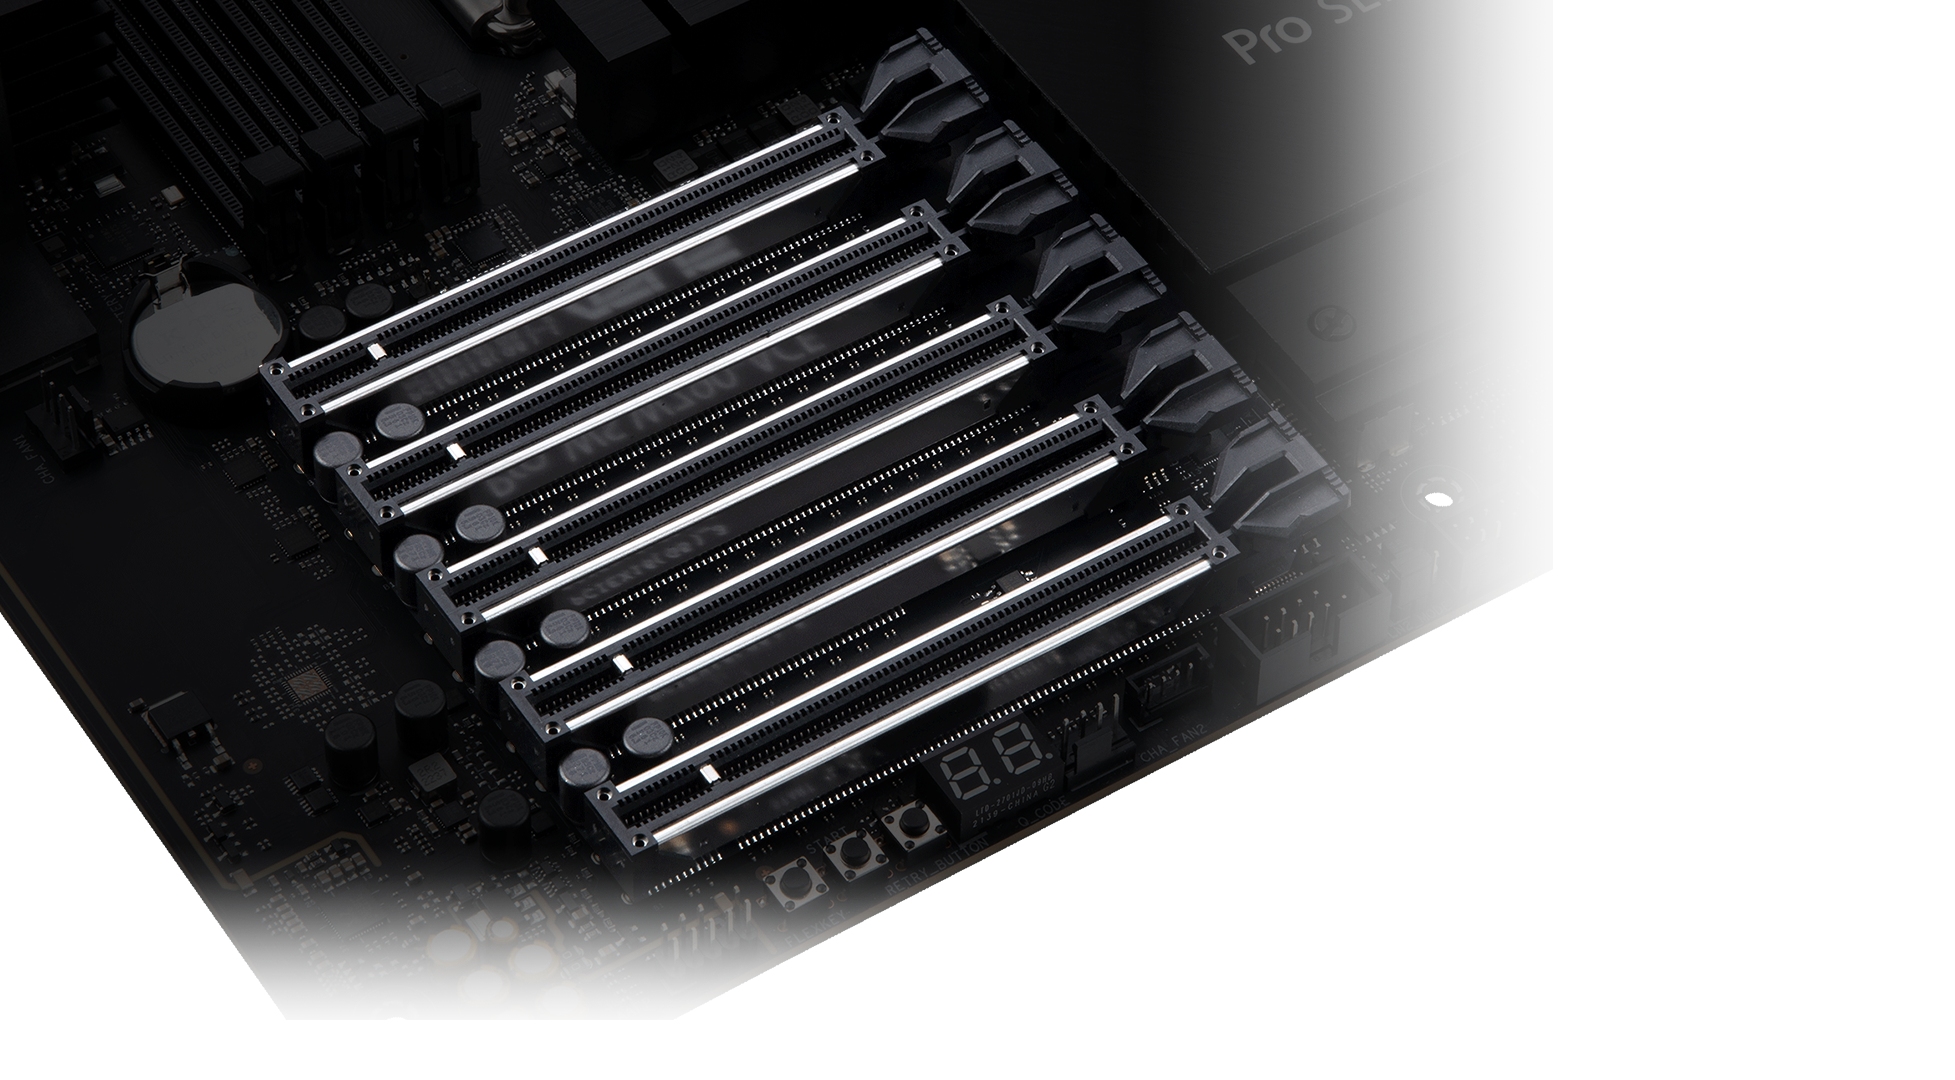 The close look on PCIe lanes